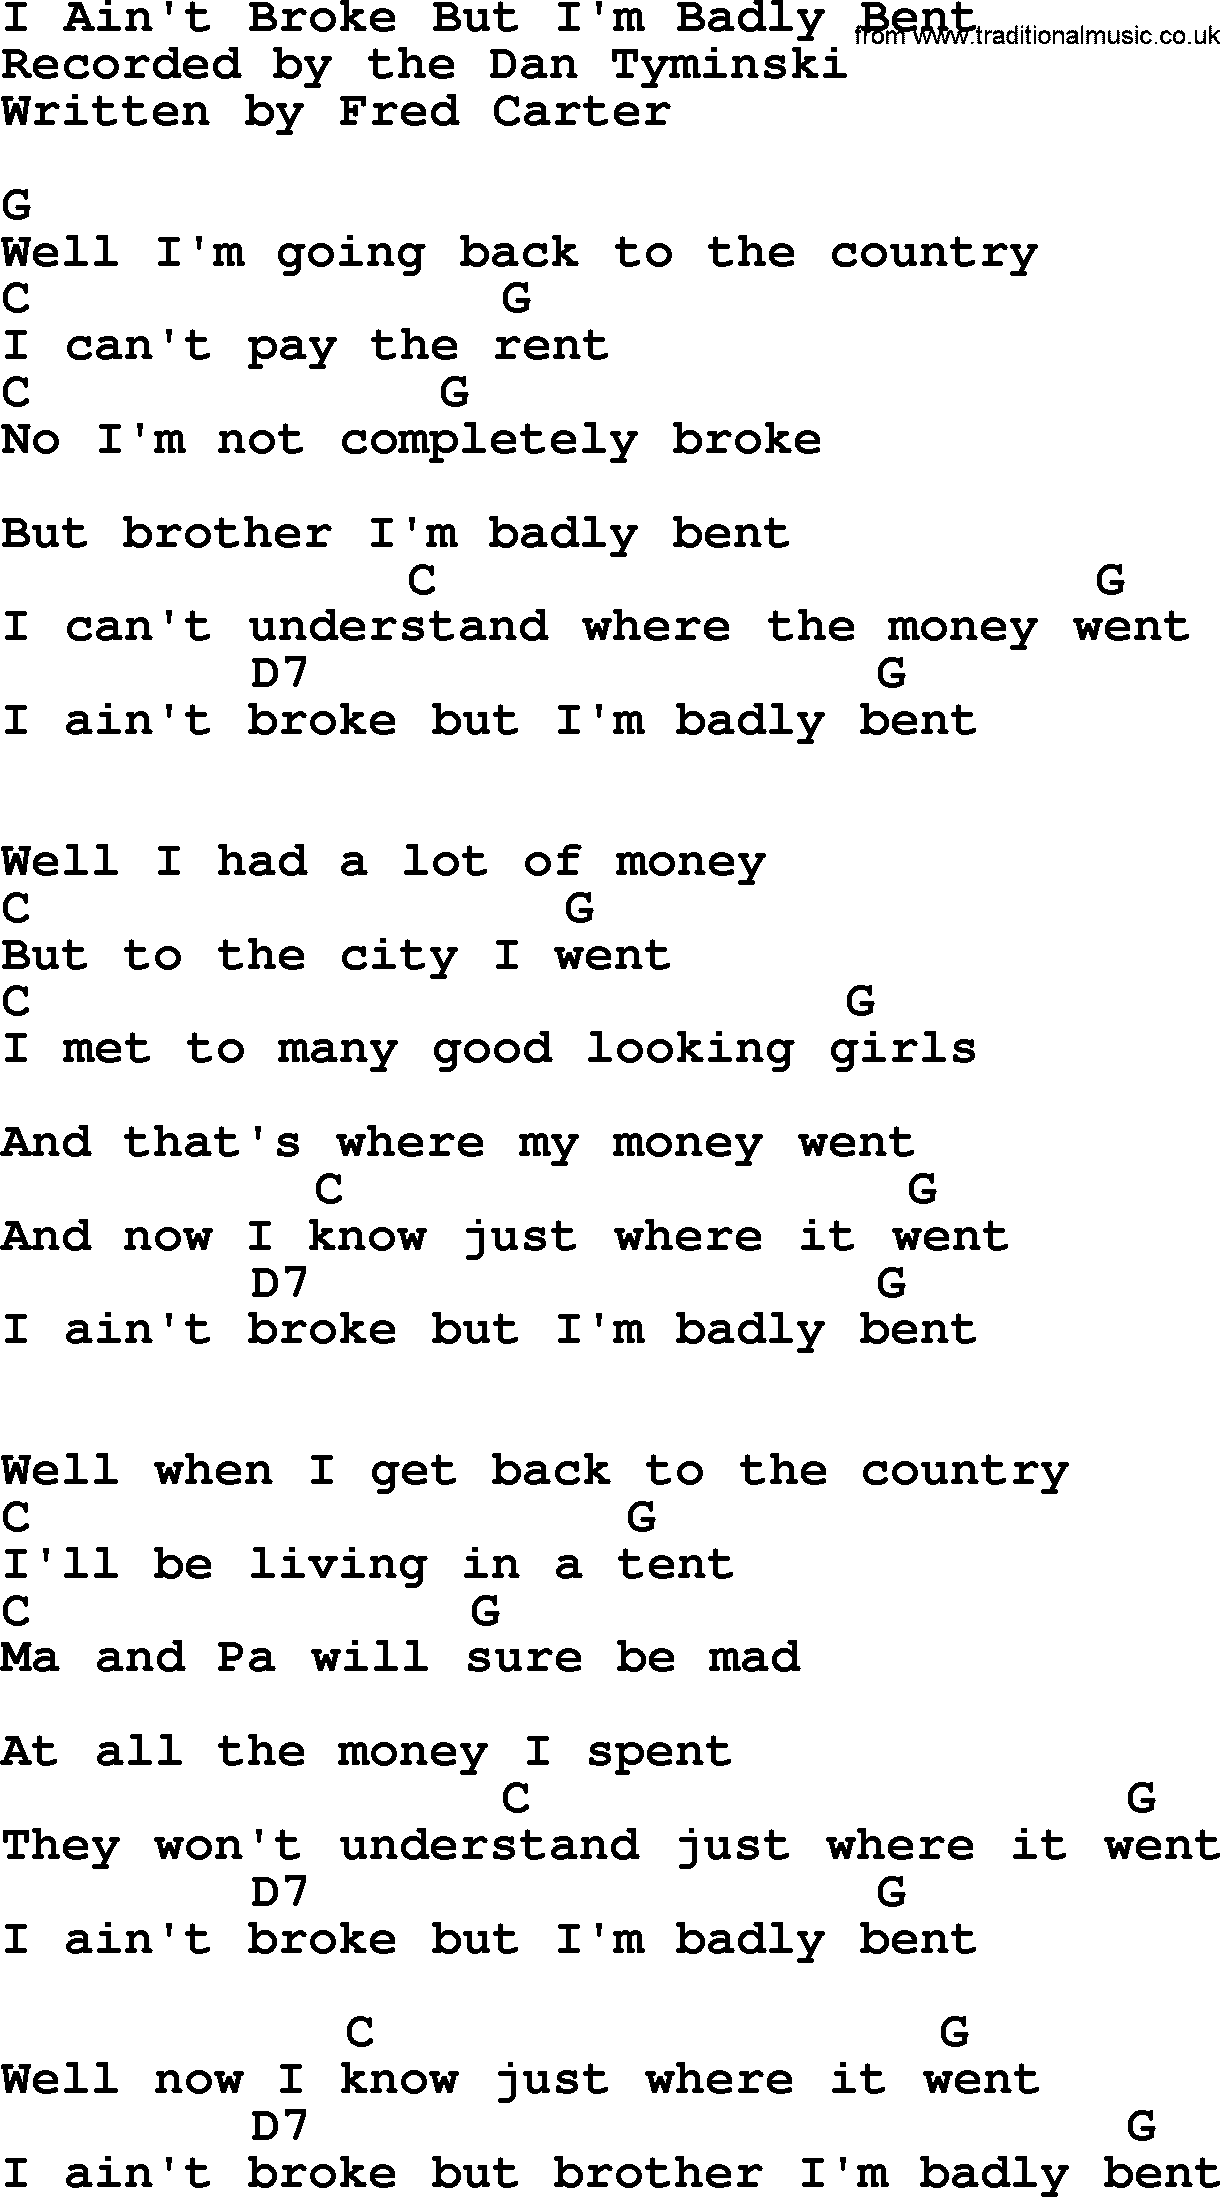 Bluegrass song: I Ain't Broke But I'm Badly Bent, lyrics and chords